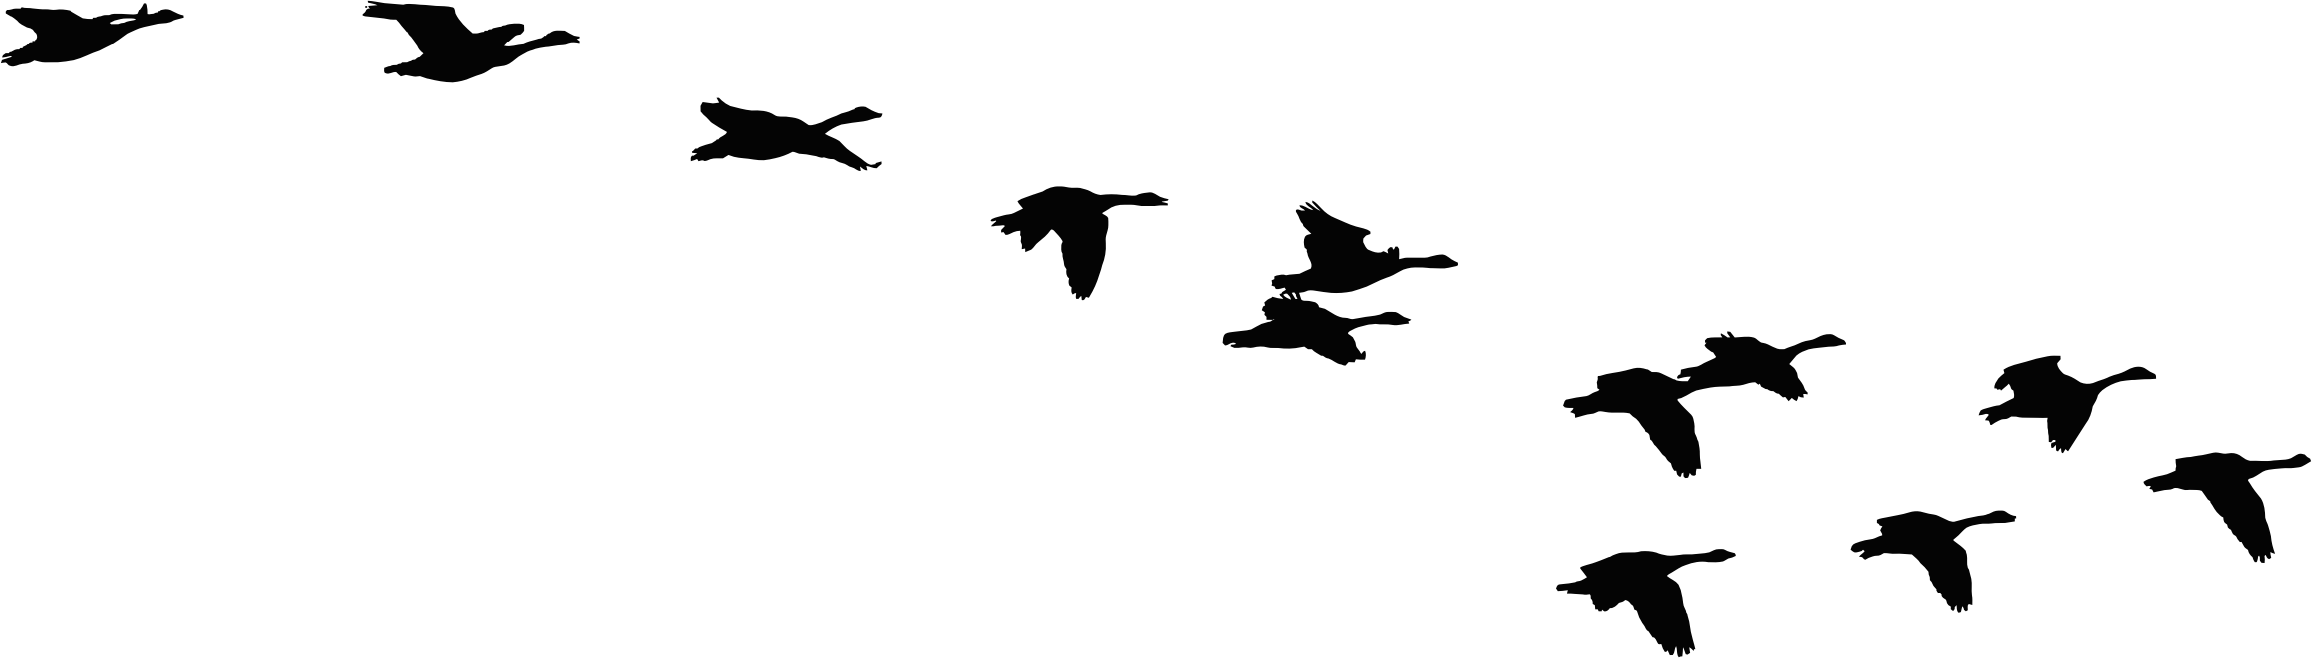 Flock Of Flying Geese Silhouette Icons Png - Flying Geese Silhouette (2635x750)